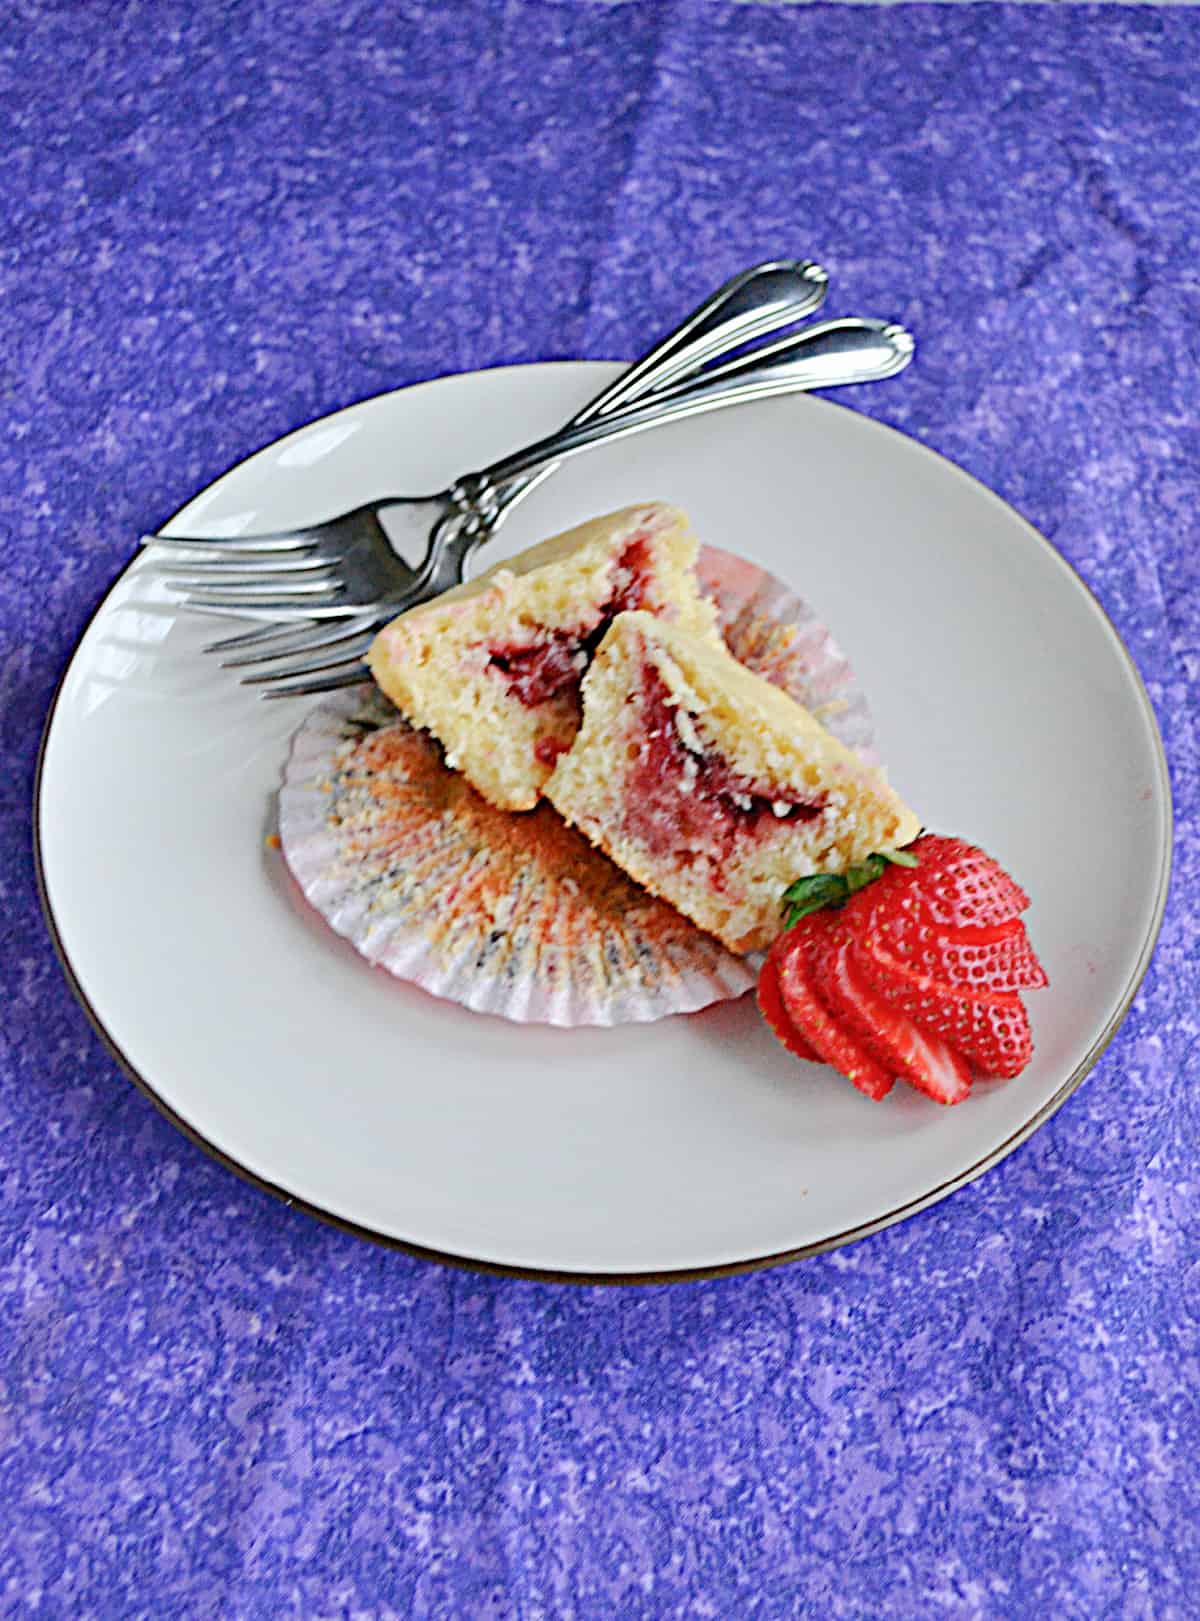 A plate with a muffin sliced in half with strawberry jam showing in the middle, a sliced strawberry, and two forks. 